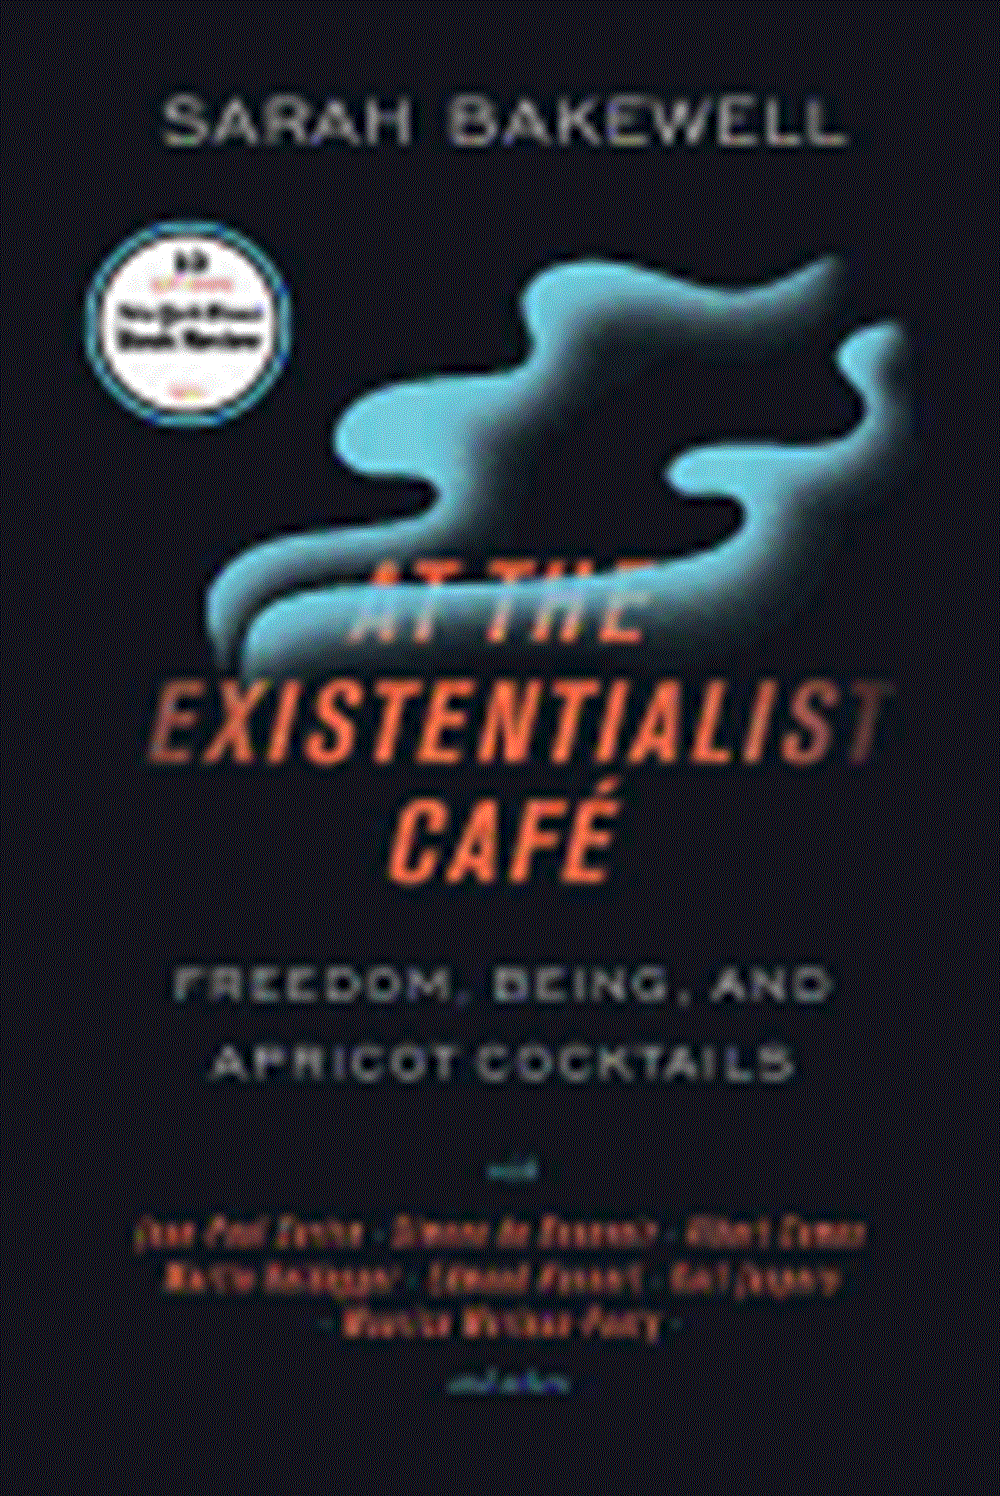 At the Existentialist Café: Freedom, Being, and Apricot Cocktails with Jean-Paul Sartre, Simone de B